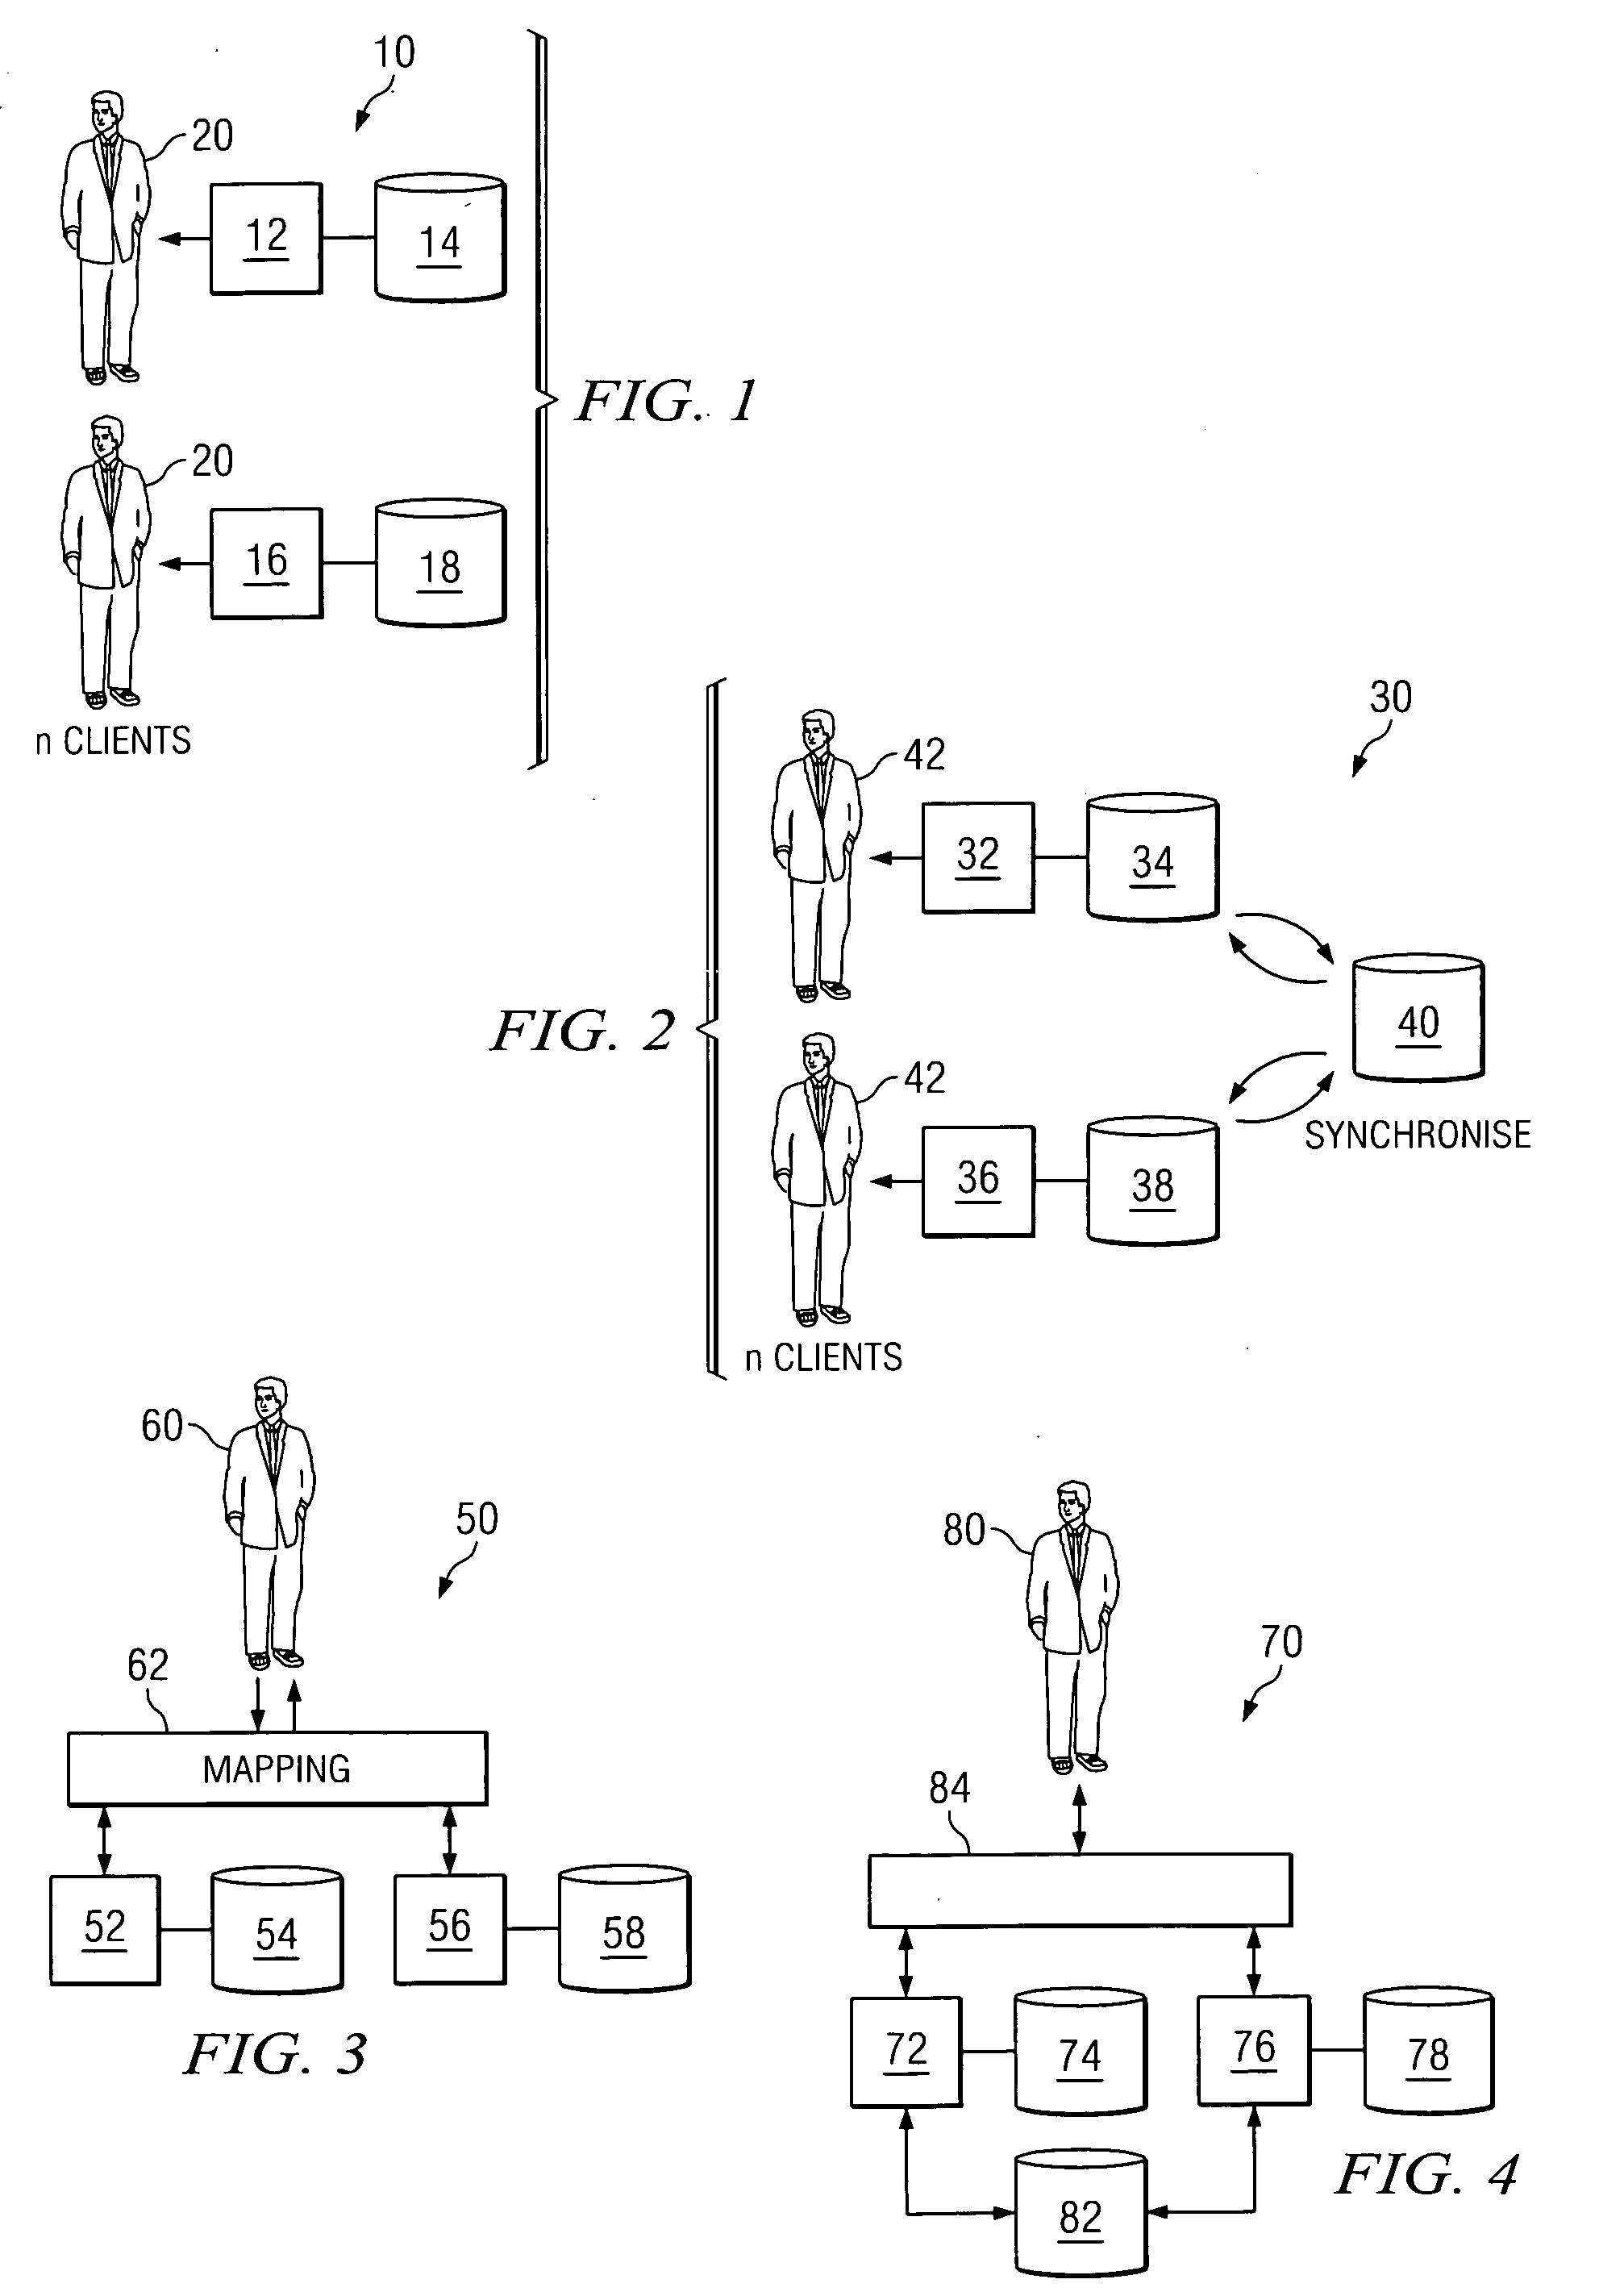 Method and system for providing a directory overlay